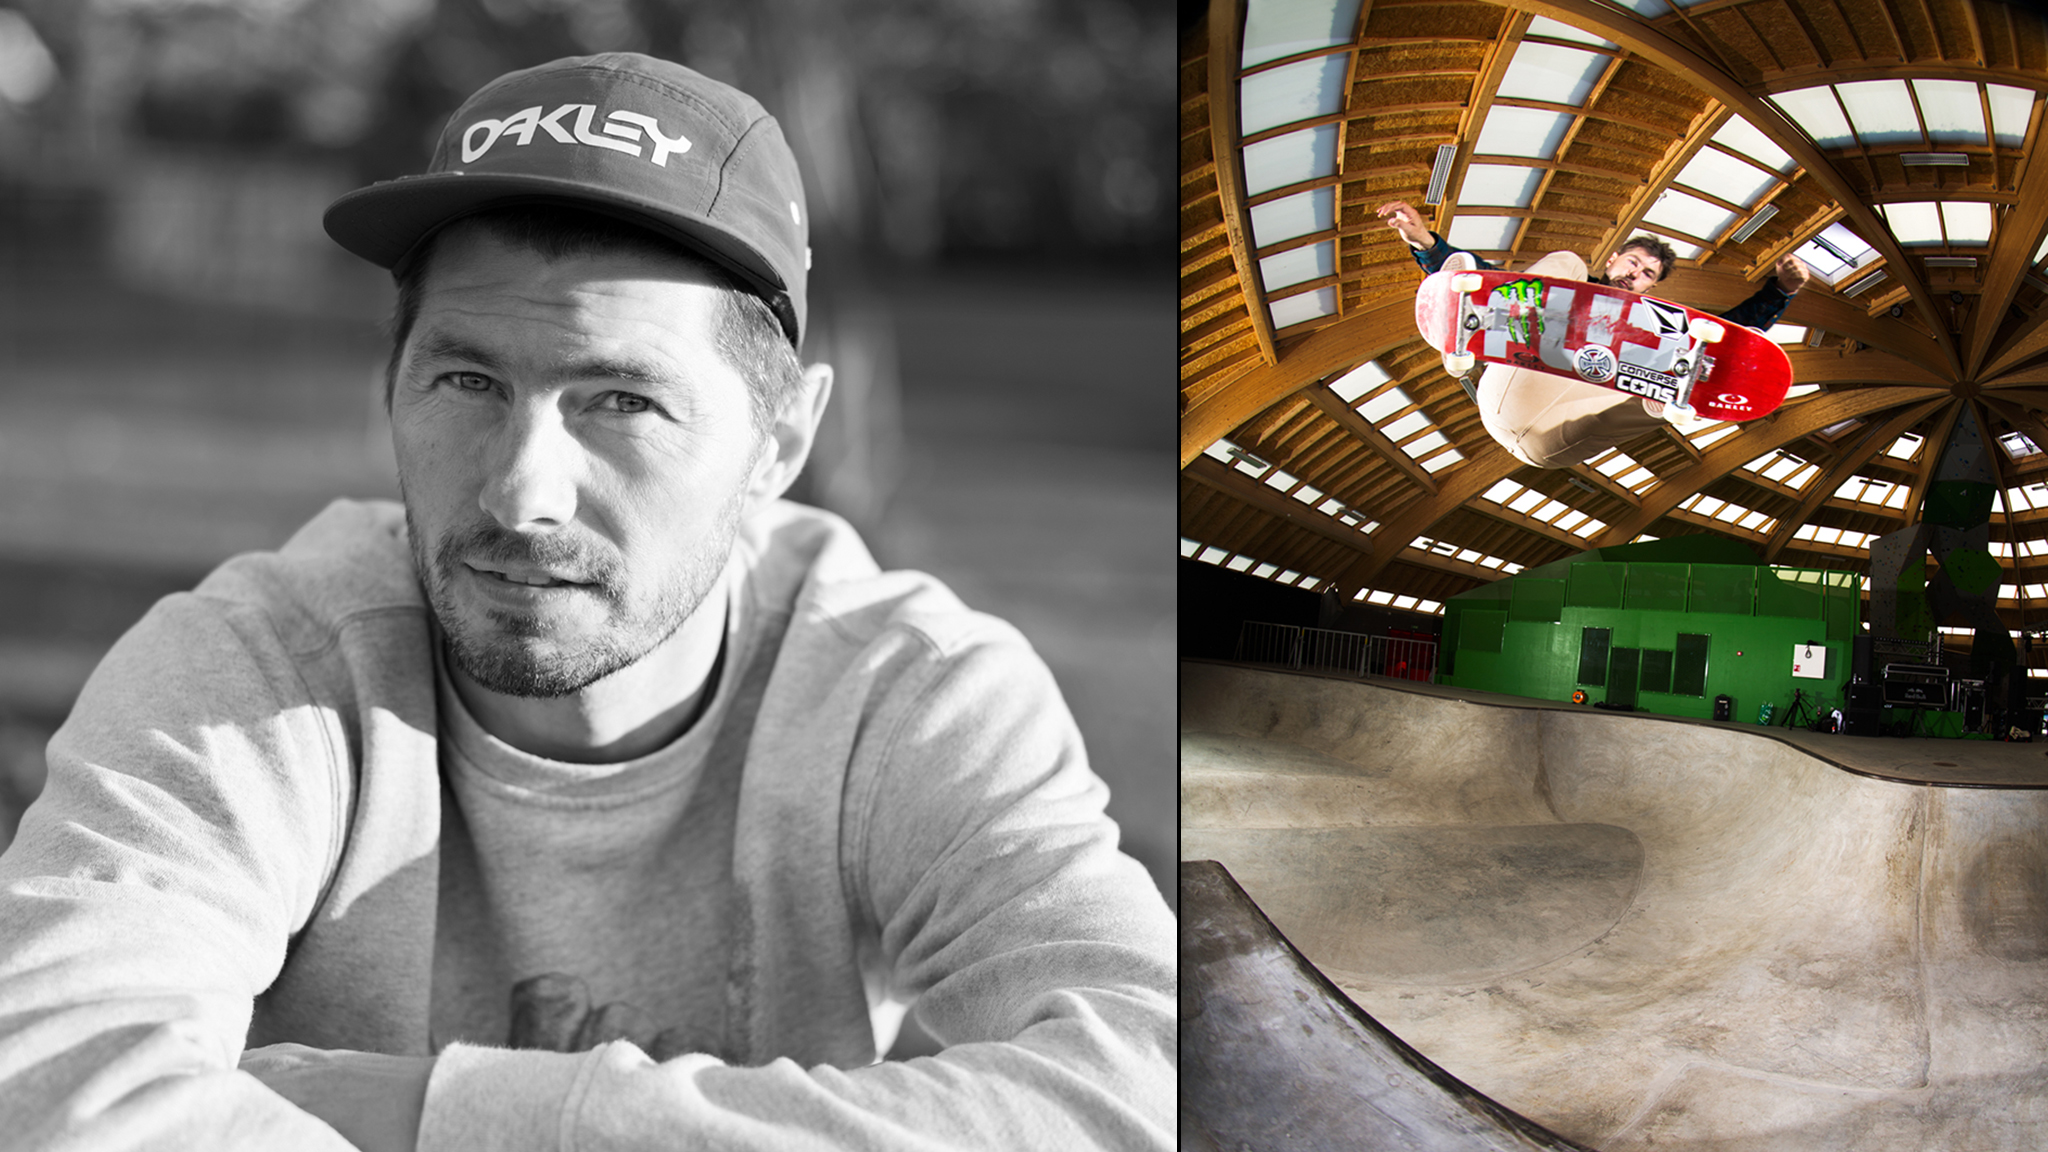 Glifberg at Streetdome - Gallery -- Rune latest project, Streetdome - X Games